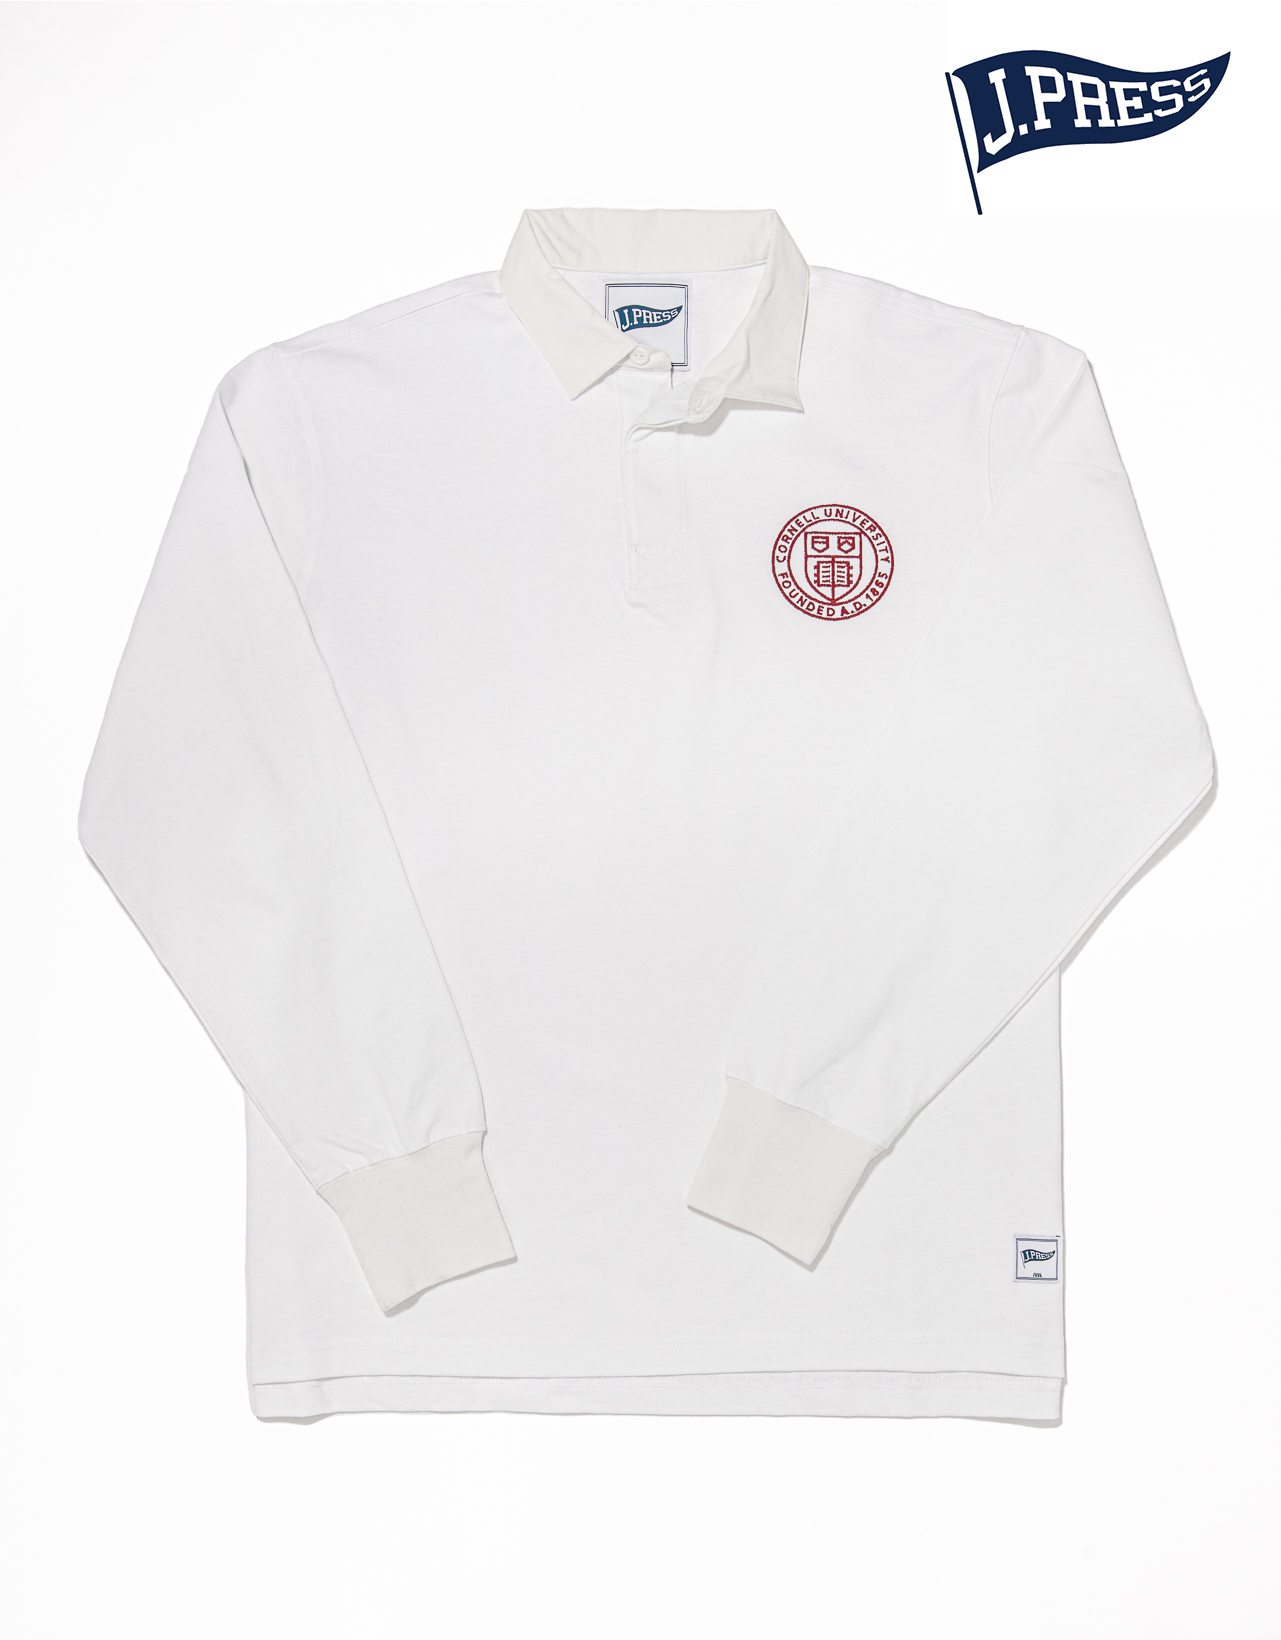 CORNELL RUGBY SHIRT - WHITE